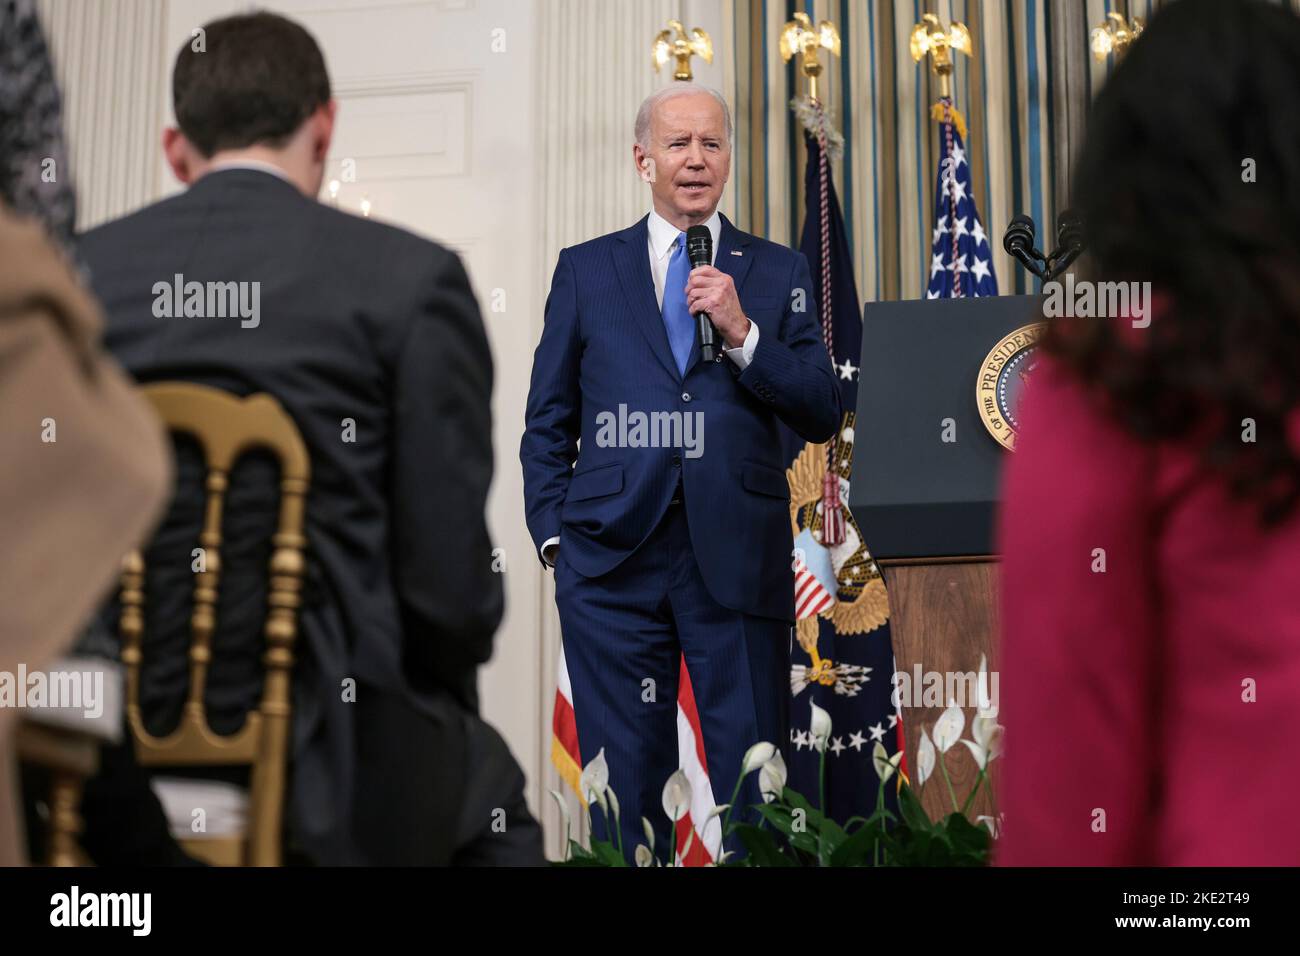 United States President Joe Biden delivers remarks and takes questions in the State Dining Room at The White House in Washington, DC, following the results of the midterm elections, on November 9, 2022. Credit: Oliver Contreras/Pool via CNP Stock Photo